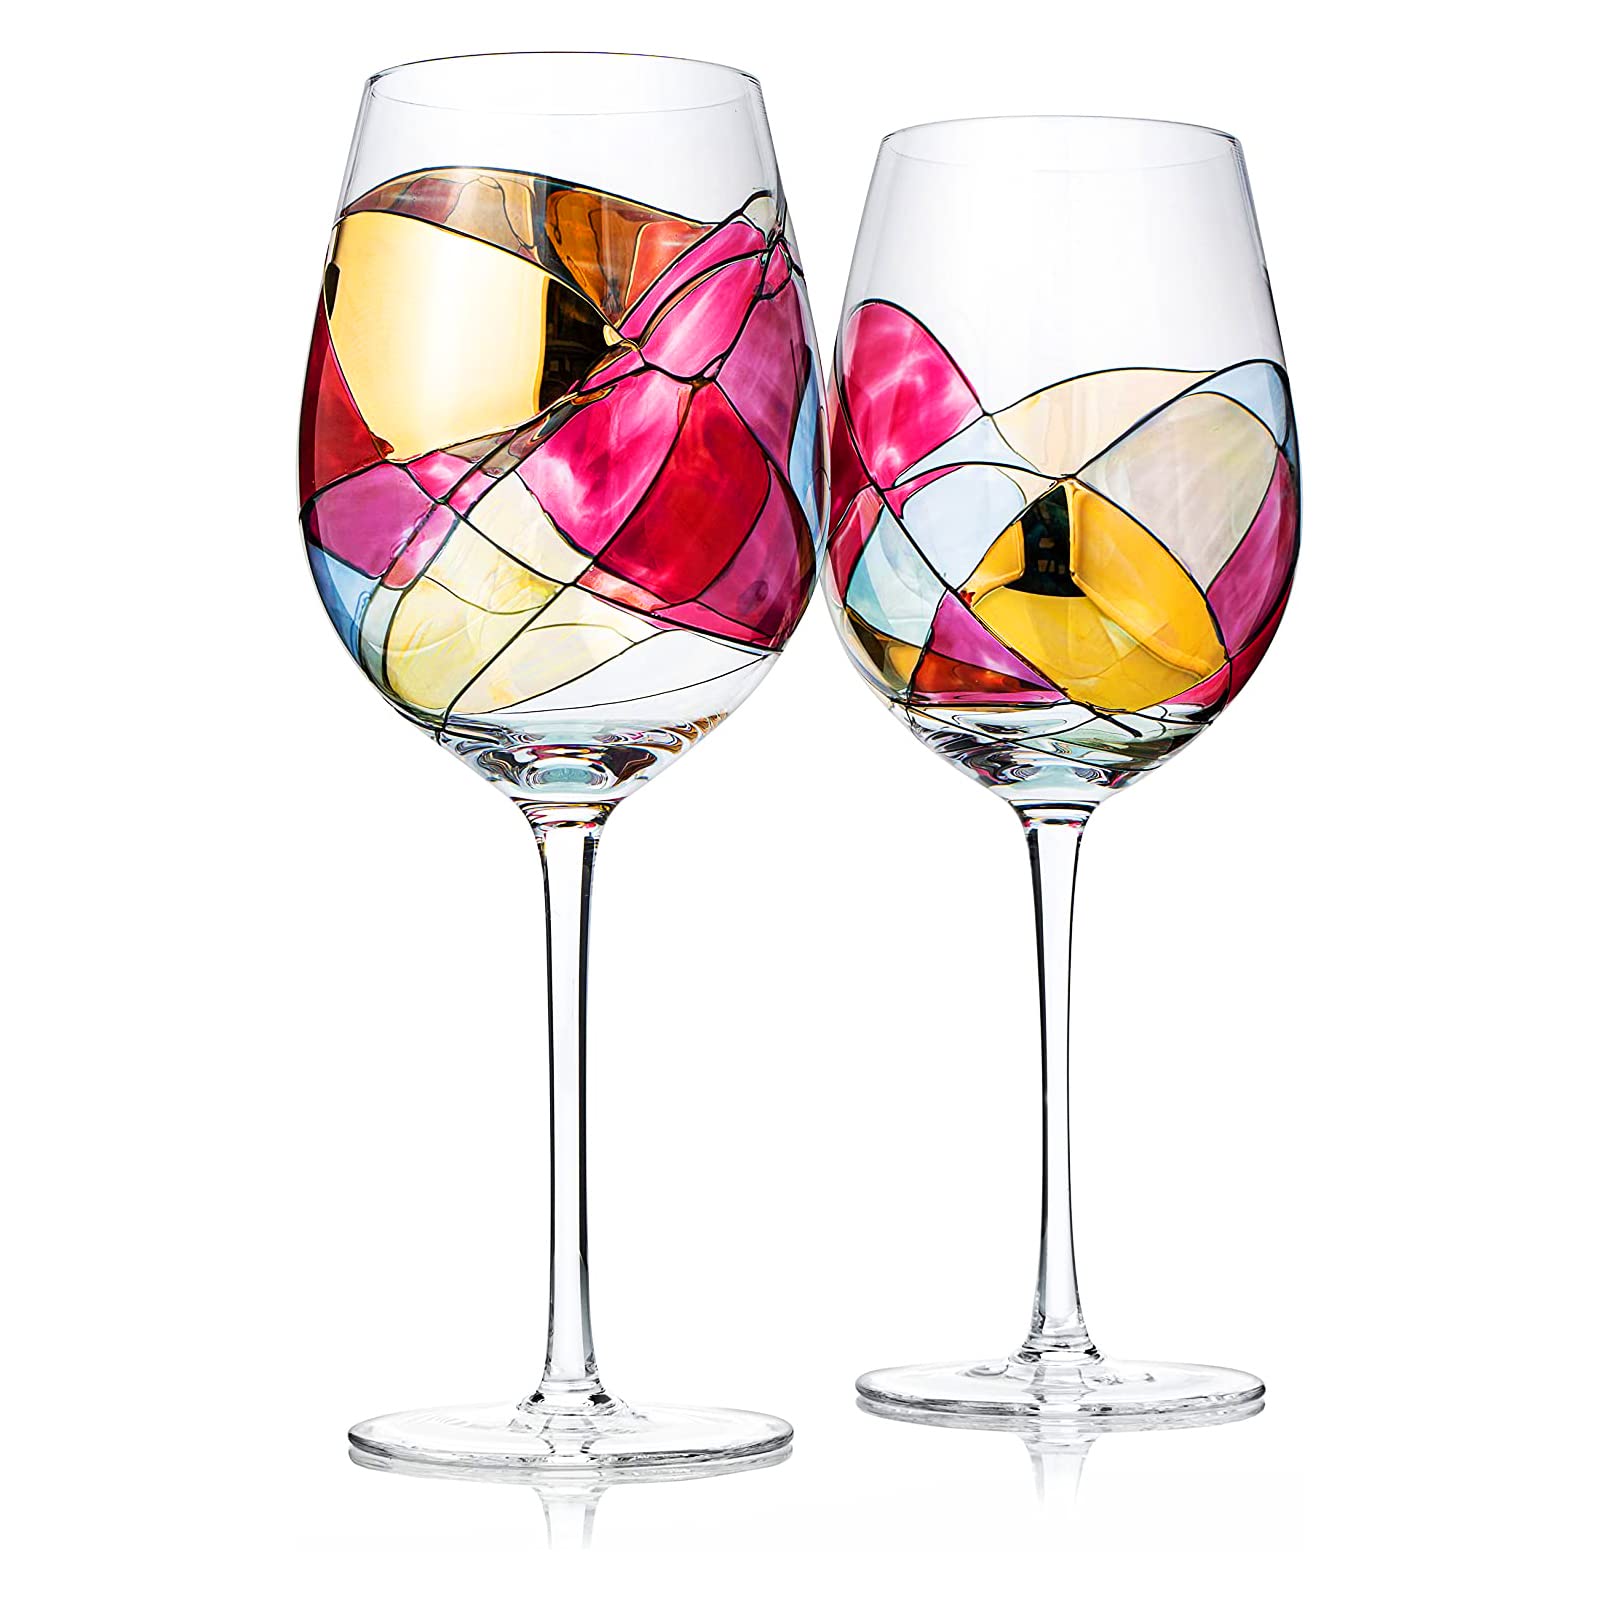 The Wine Savant Artisanal Hand Painted Stemless - Rennesance Romantic Stain-glassed Windows Wine glasses, By The Wine Savant - Set of 2 - gift I